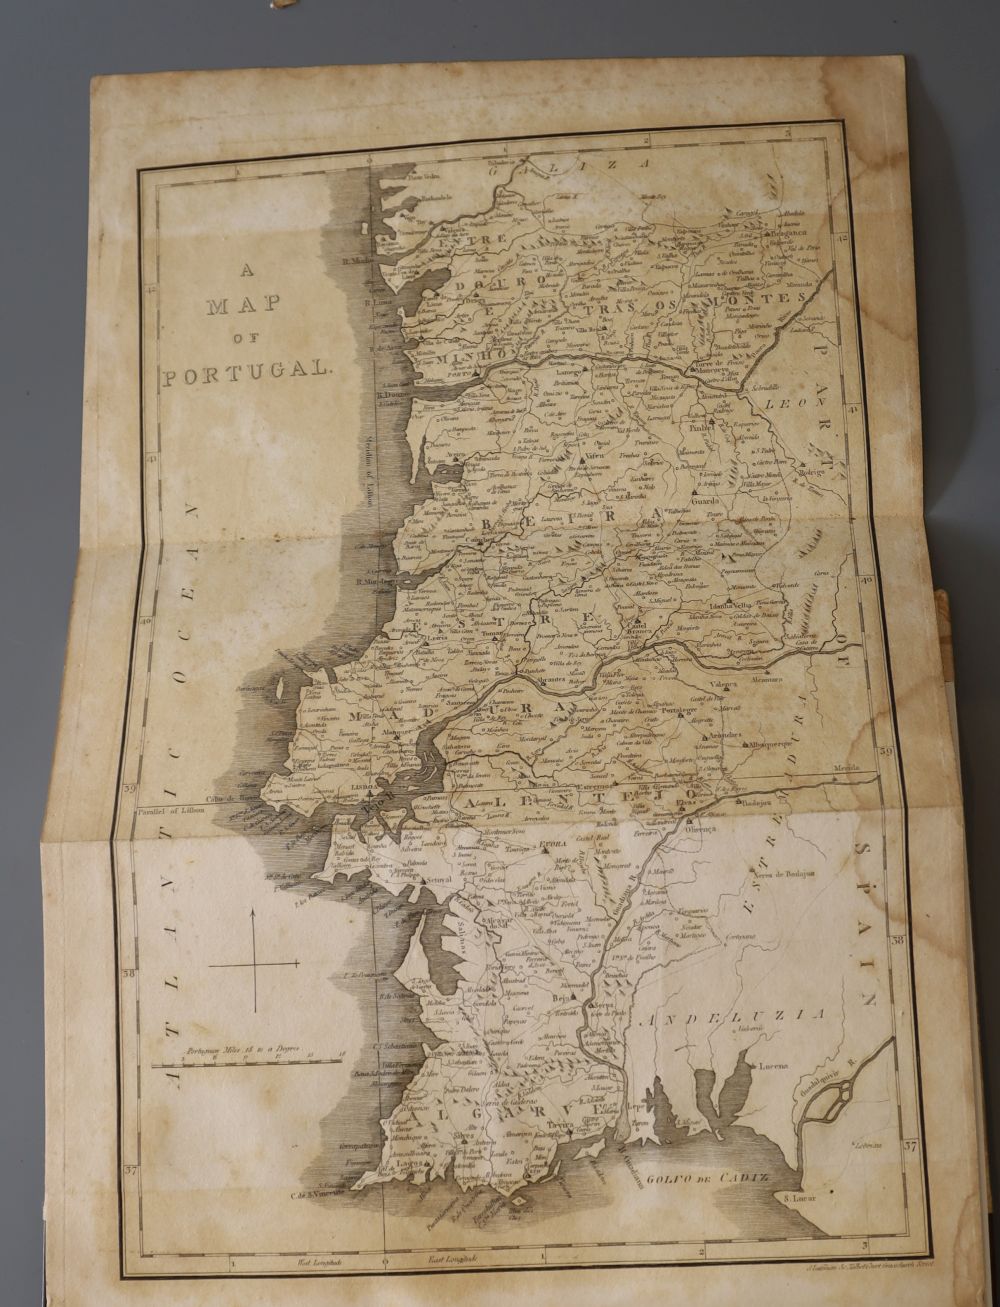 Murphy, James Cavanah, 1760-1814. - General view of the State of Portugal, 1st edition, modern half calf, folio, with folding map and 1